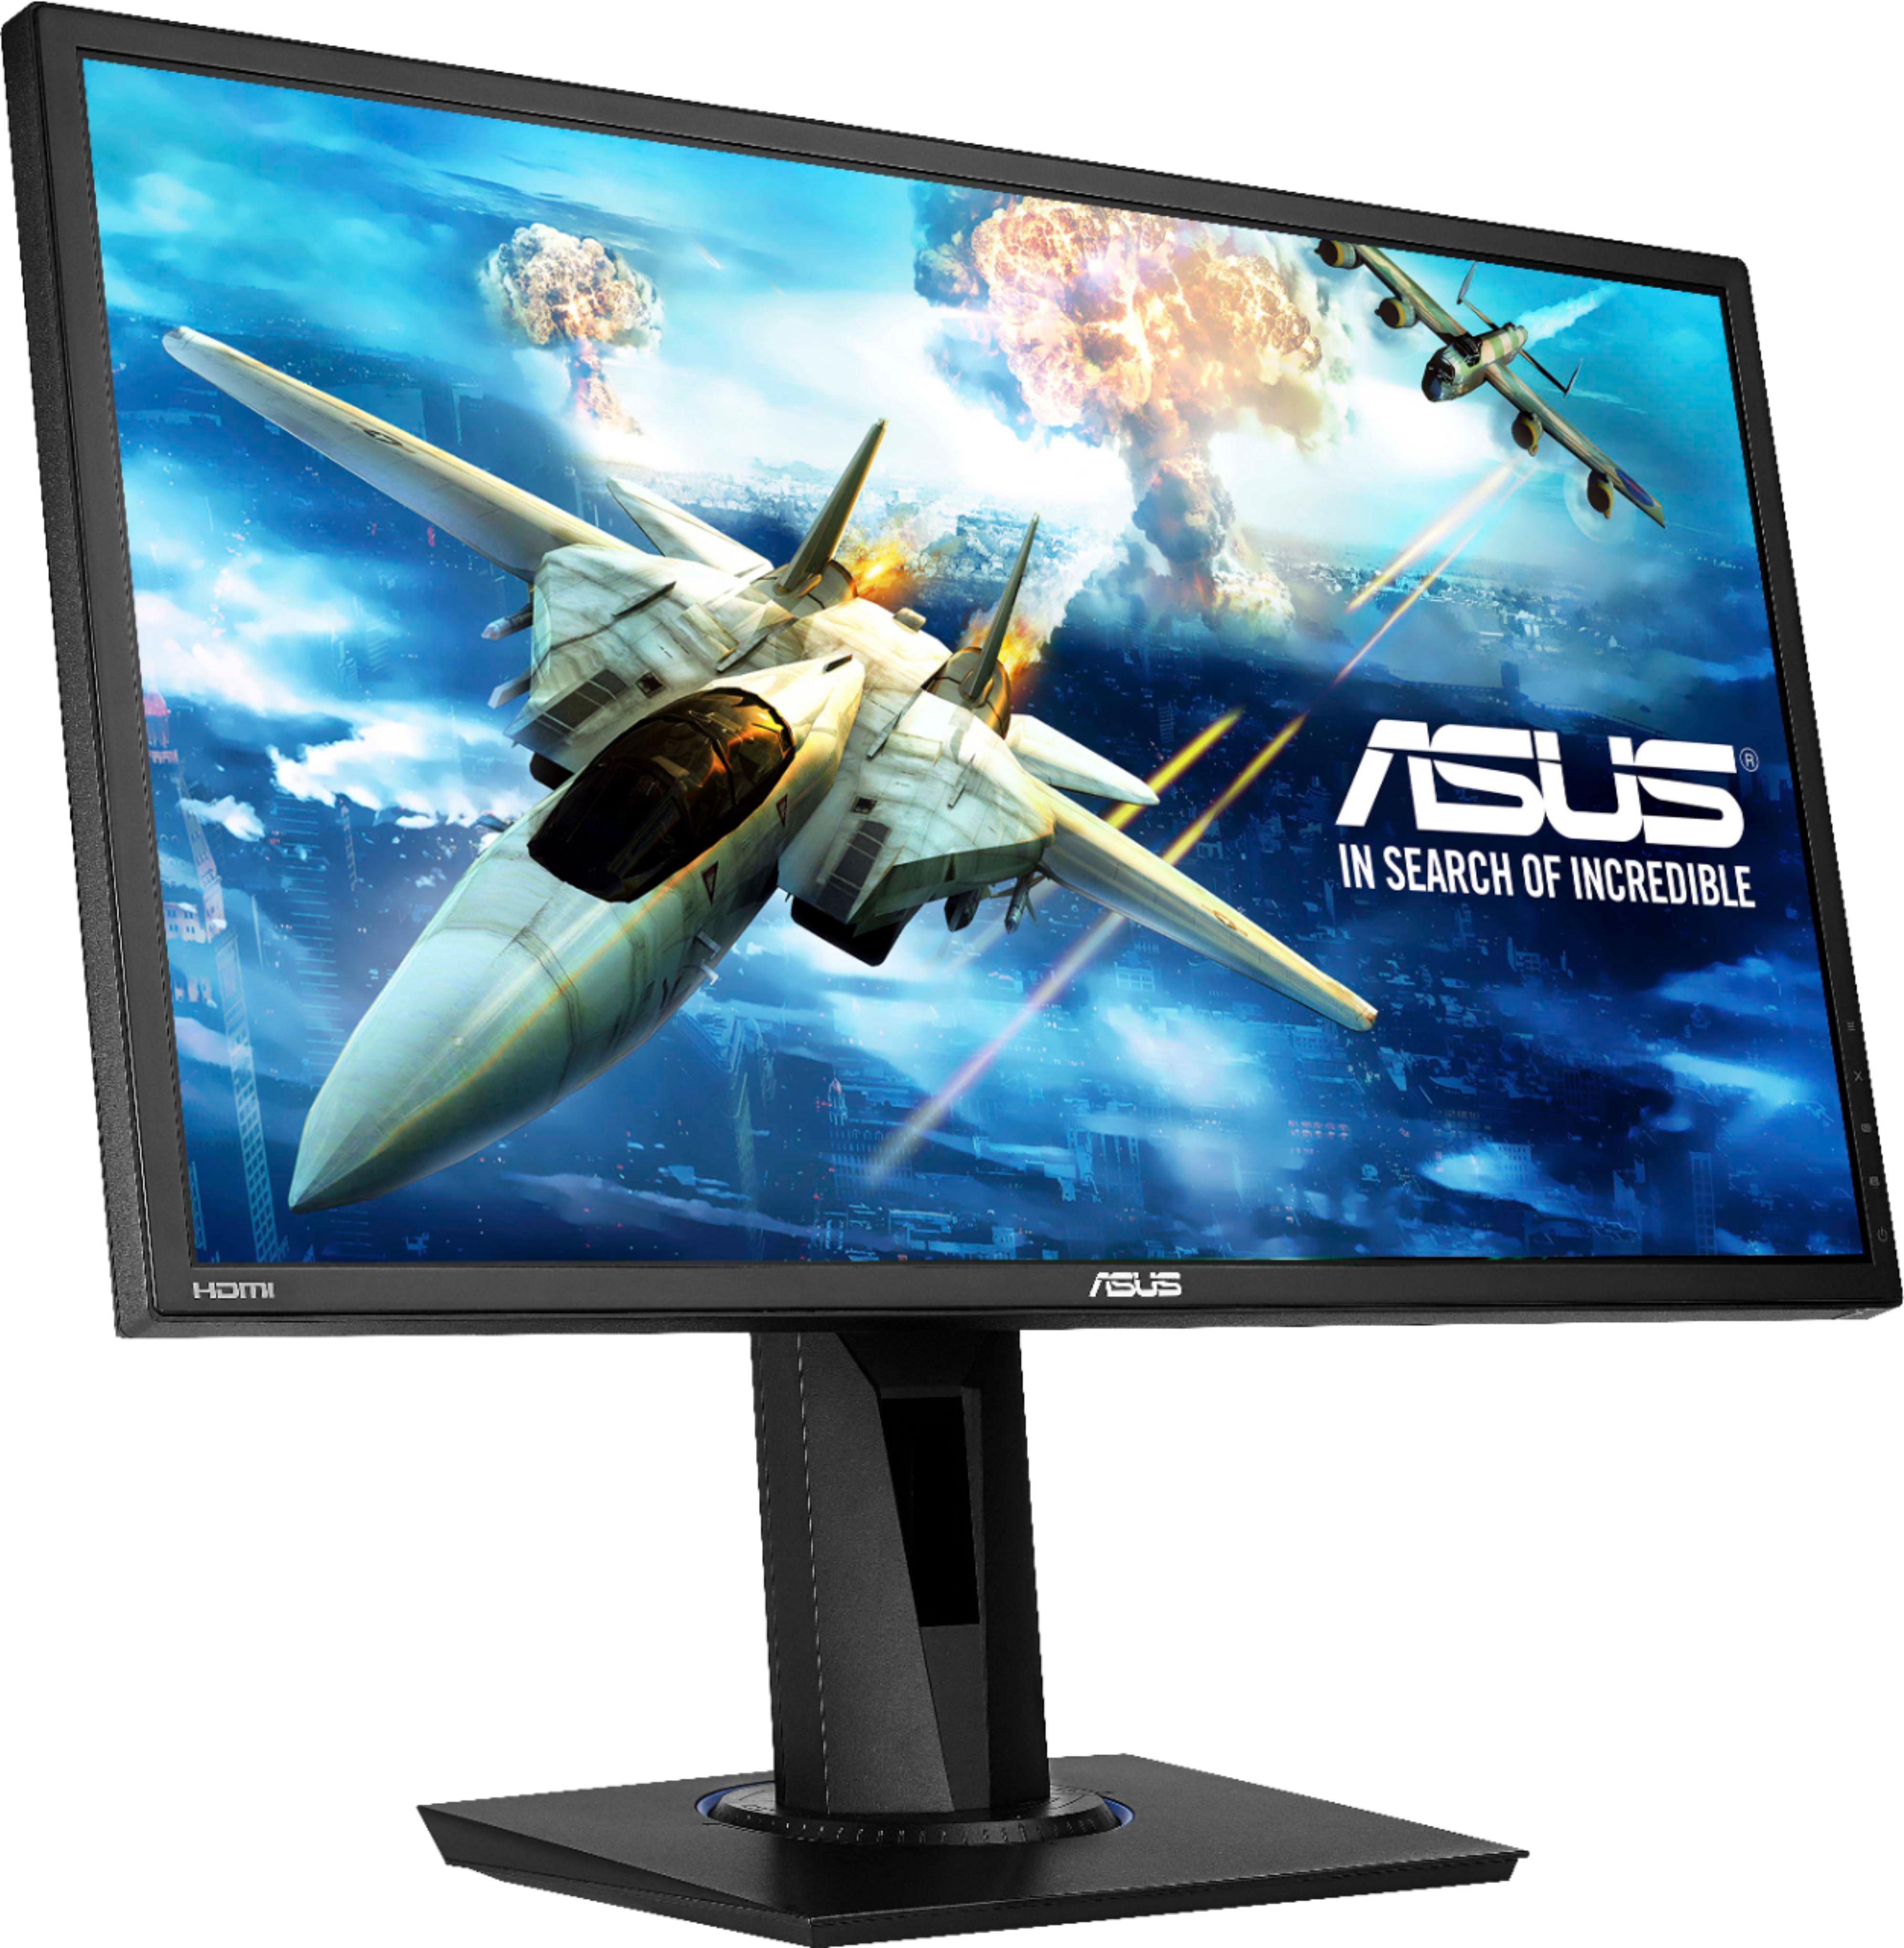 Angle View: ASUS - Geek Squad Certified Refurbished 24" LED FHD FreeSync Monitor - Black